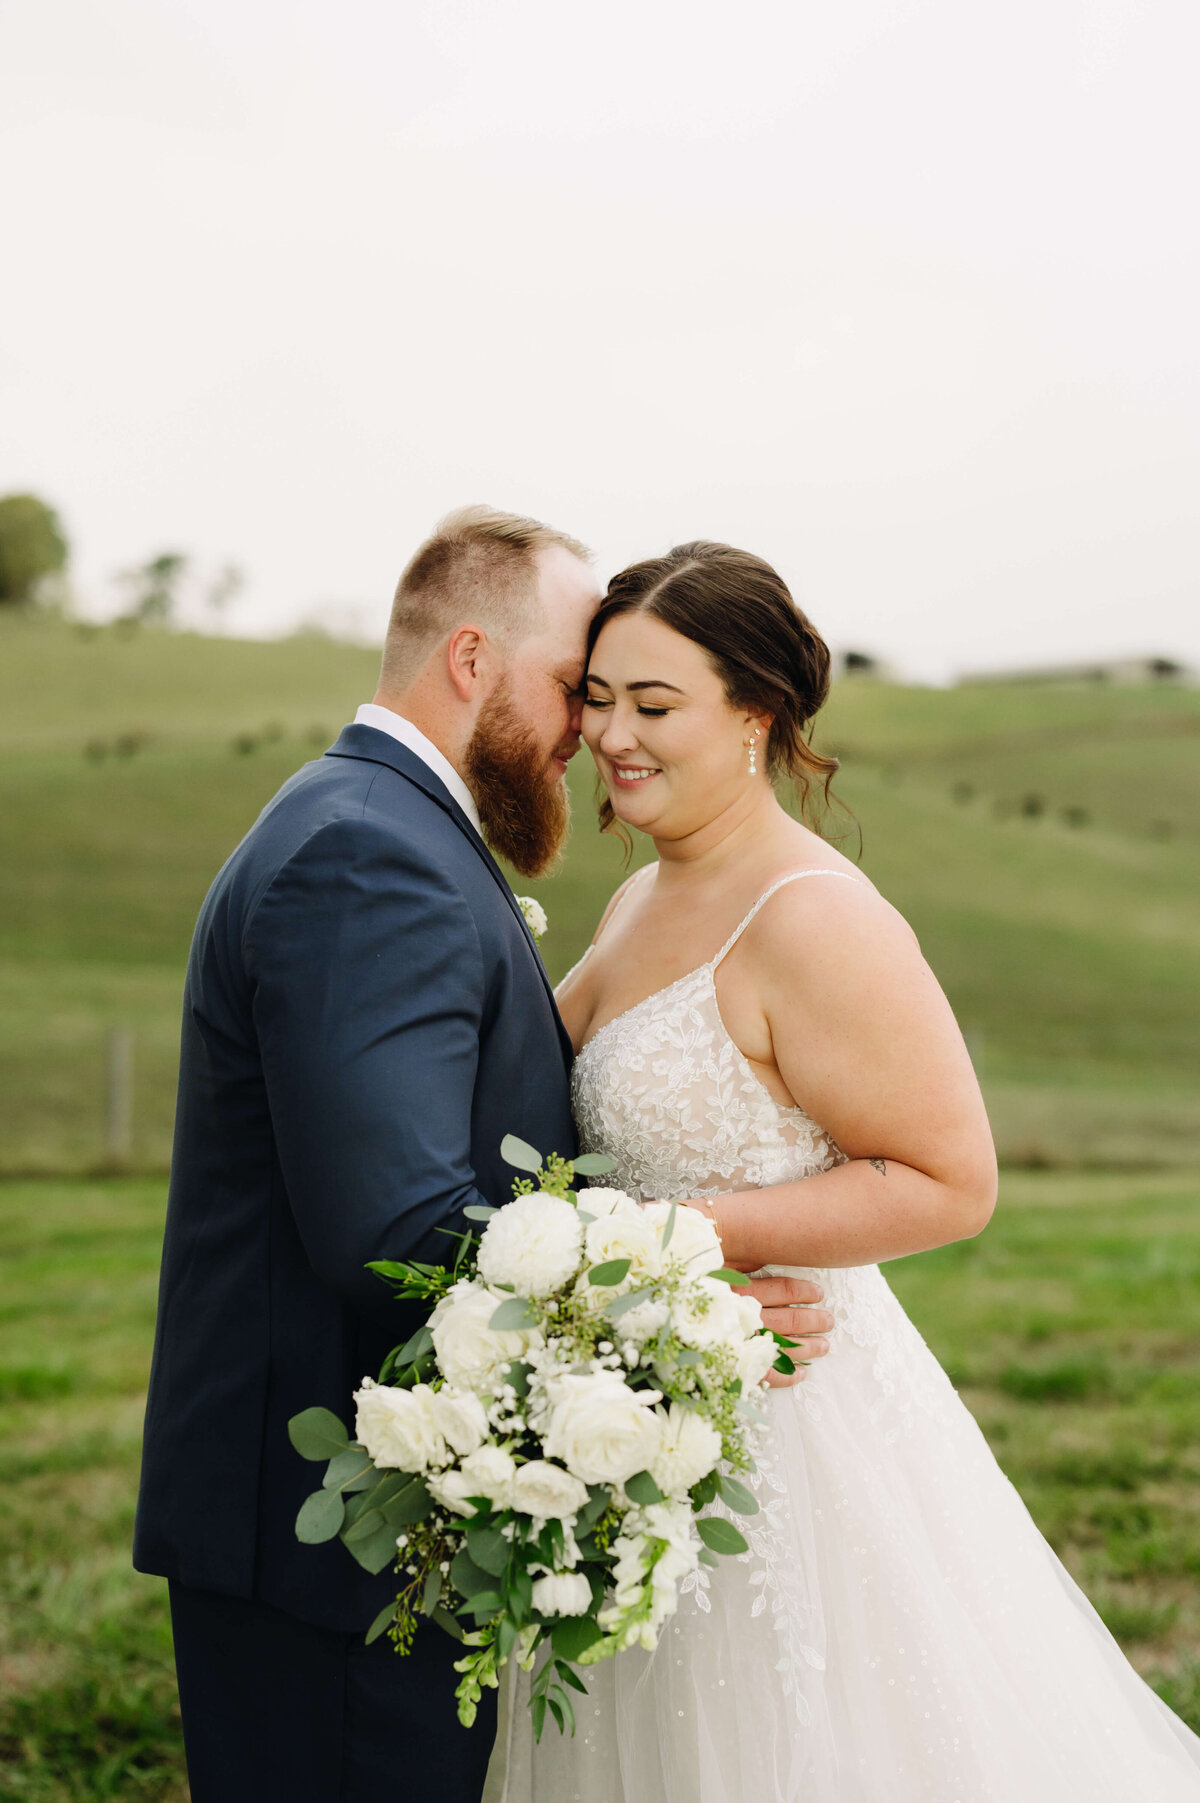 wedding portrait of groom leaning into his bride and whispers to her as she smiles while holding a white rose bouquet at Sunny Slope Farm